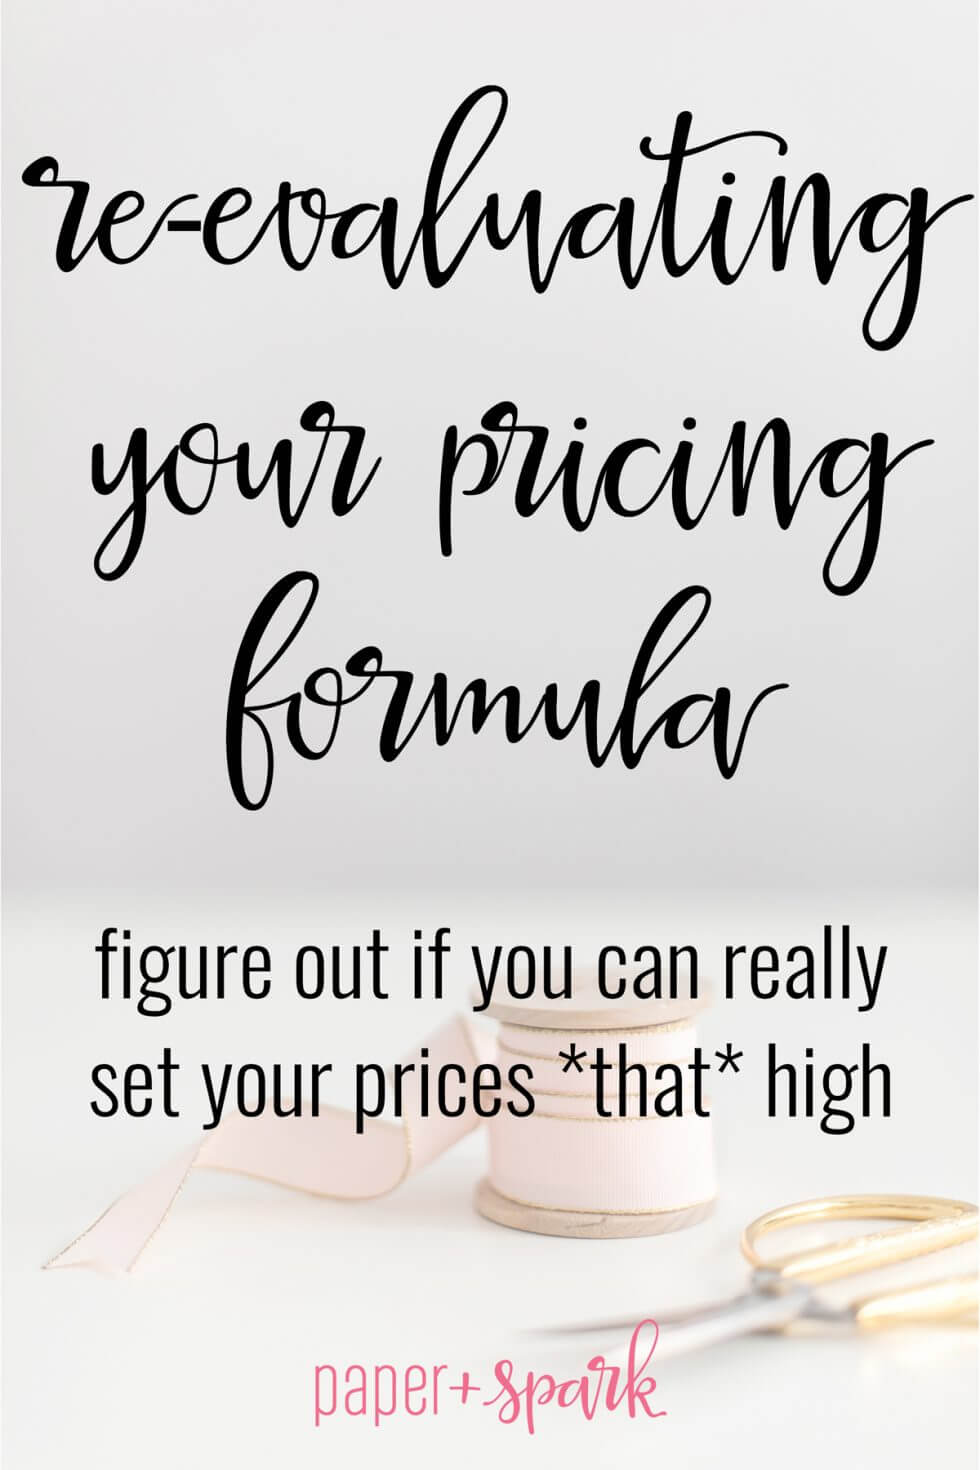 Re-evaluating the pricing formula: So you try out a formula for your handmade goods and the resulting price is crazy high. What do you do?